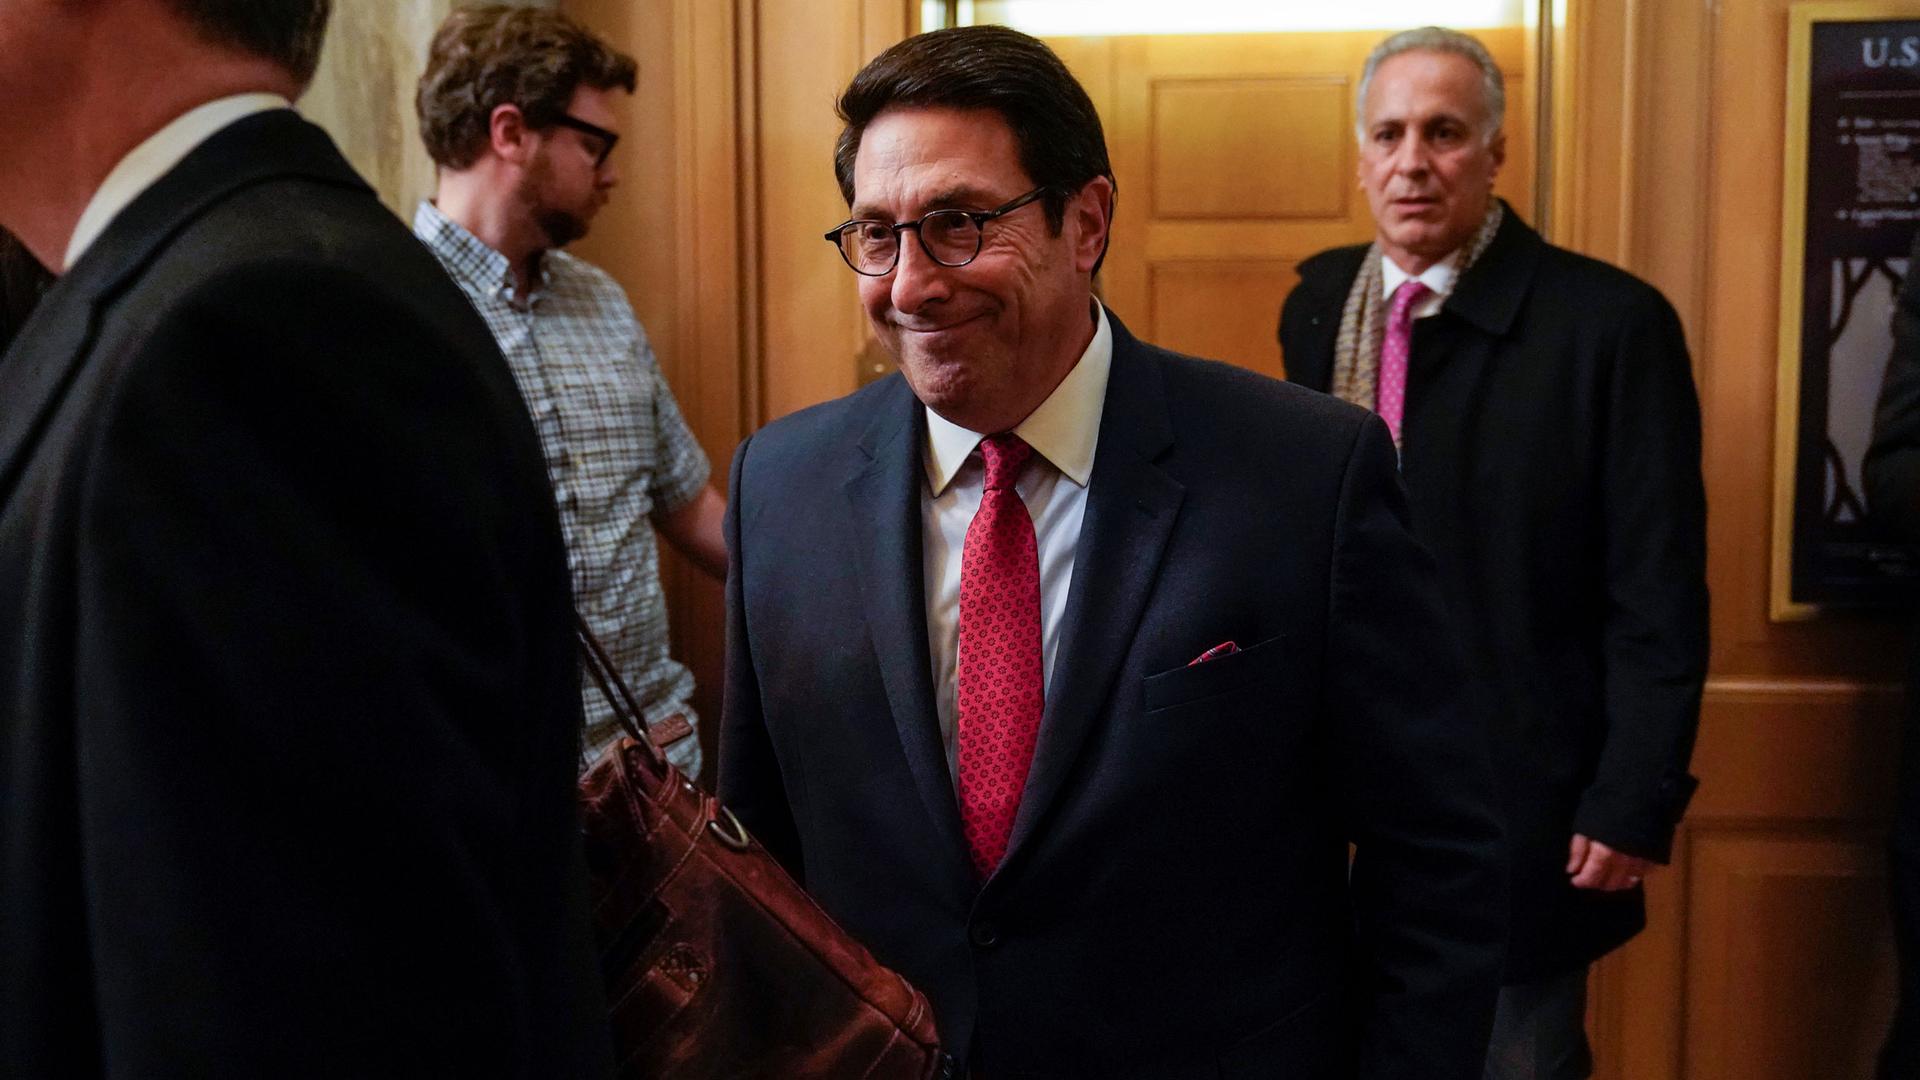 US President Donald Trump's personal attorney Jay Sekulow is shown wearing a dark suit and walking among several people.